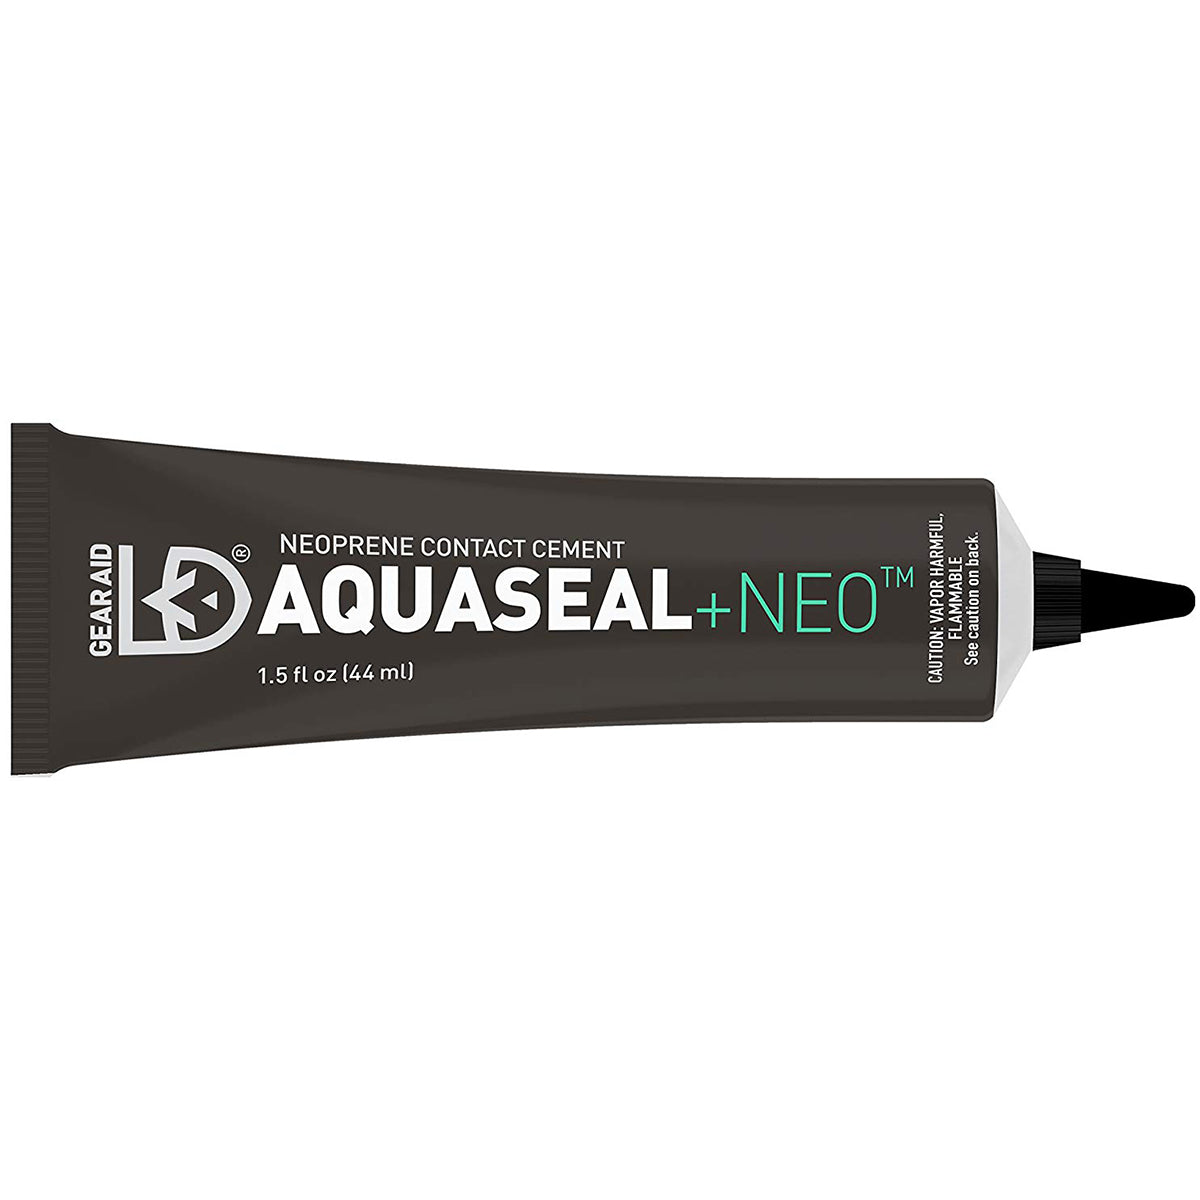 Gear Aid NEO Neoprene Contact Wetsuit Repair Cement Gear Aid